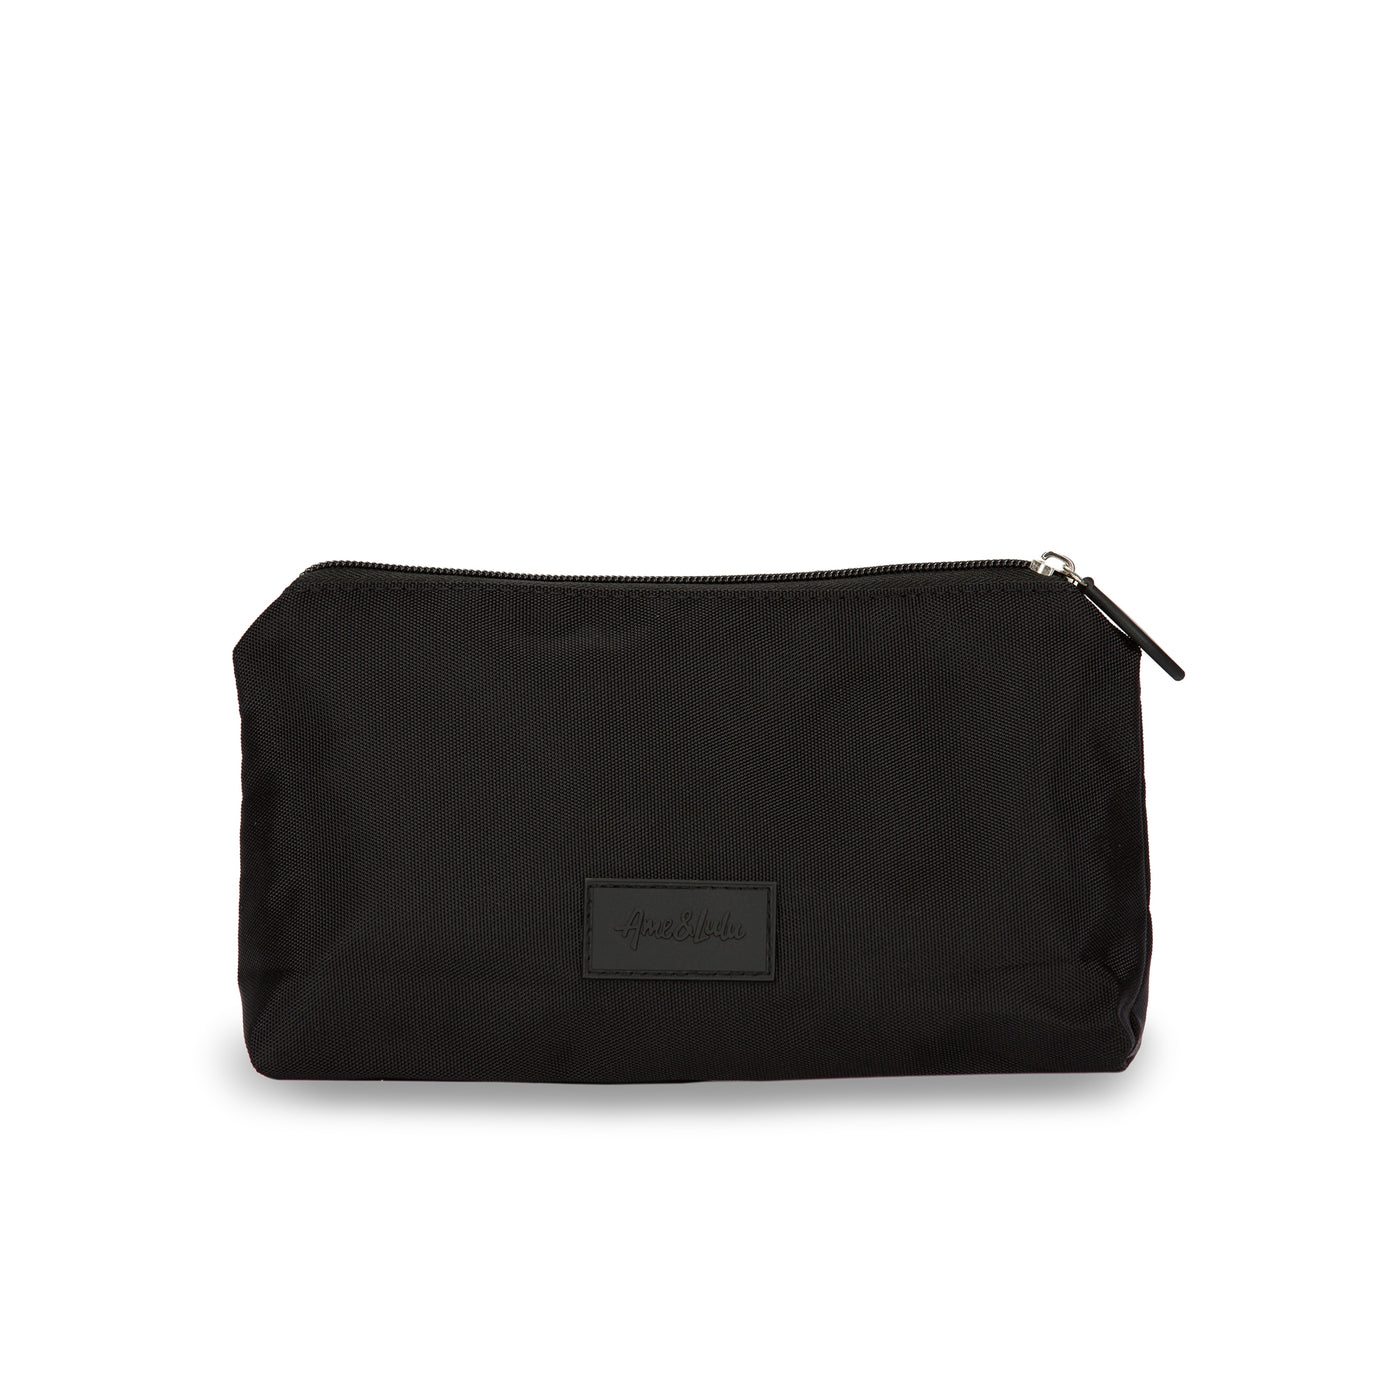 Back view of all black everyday pouch